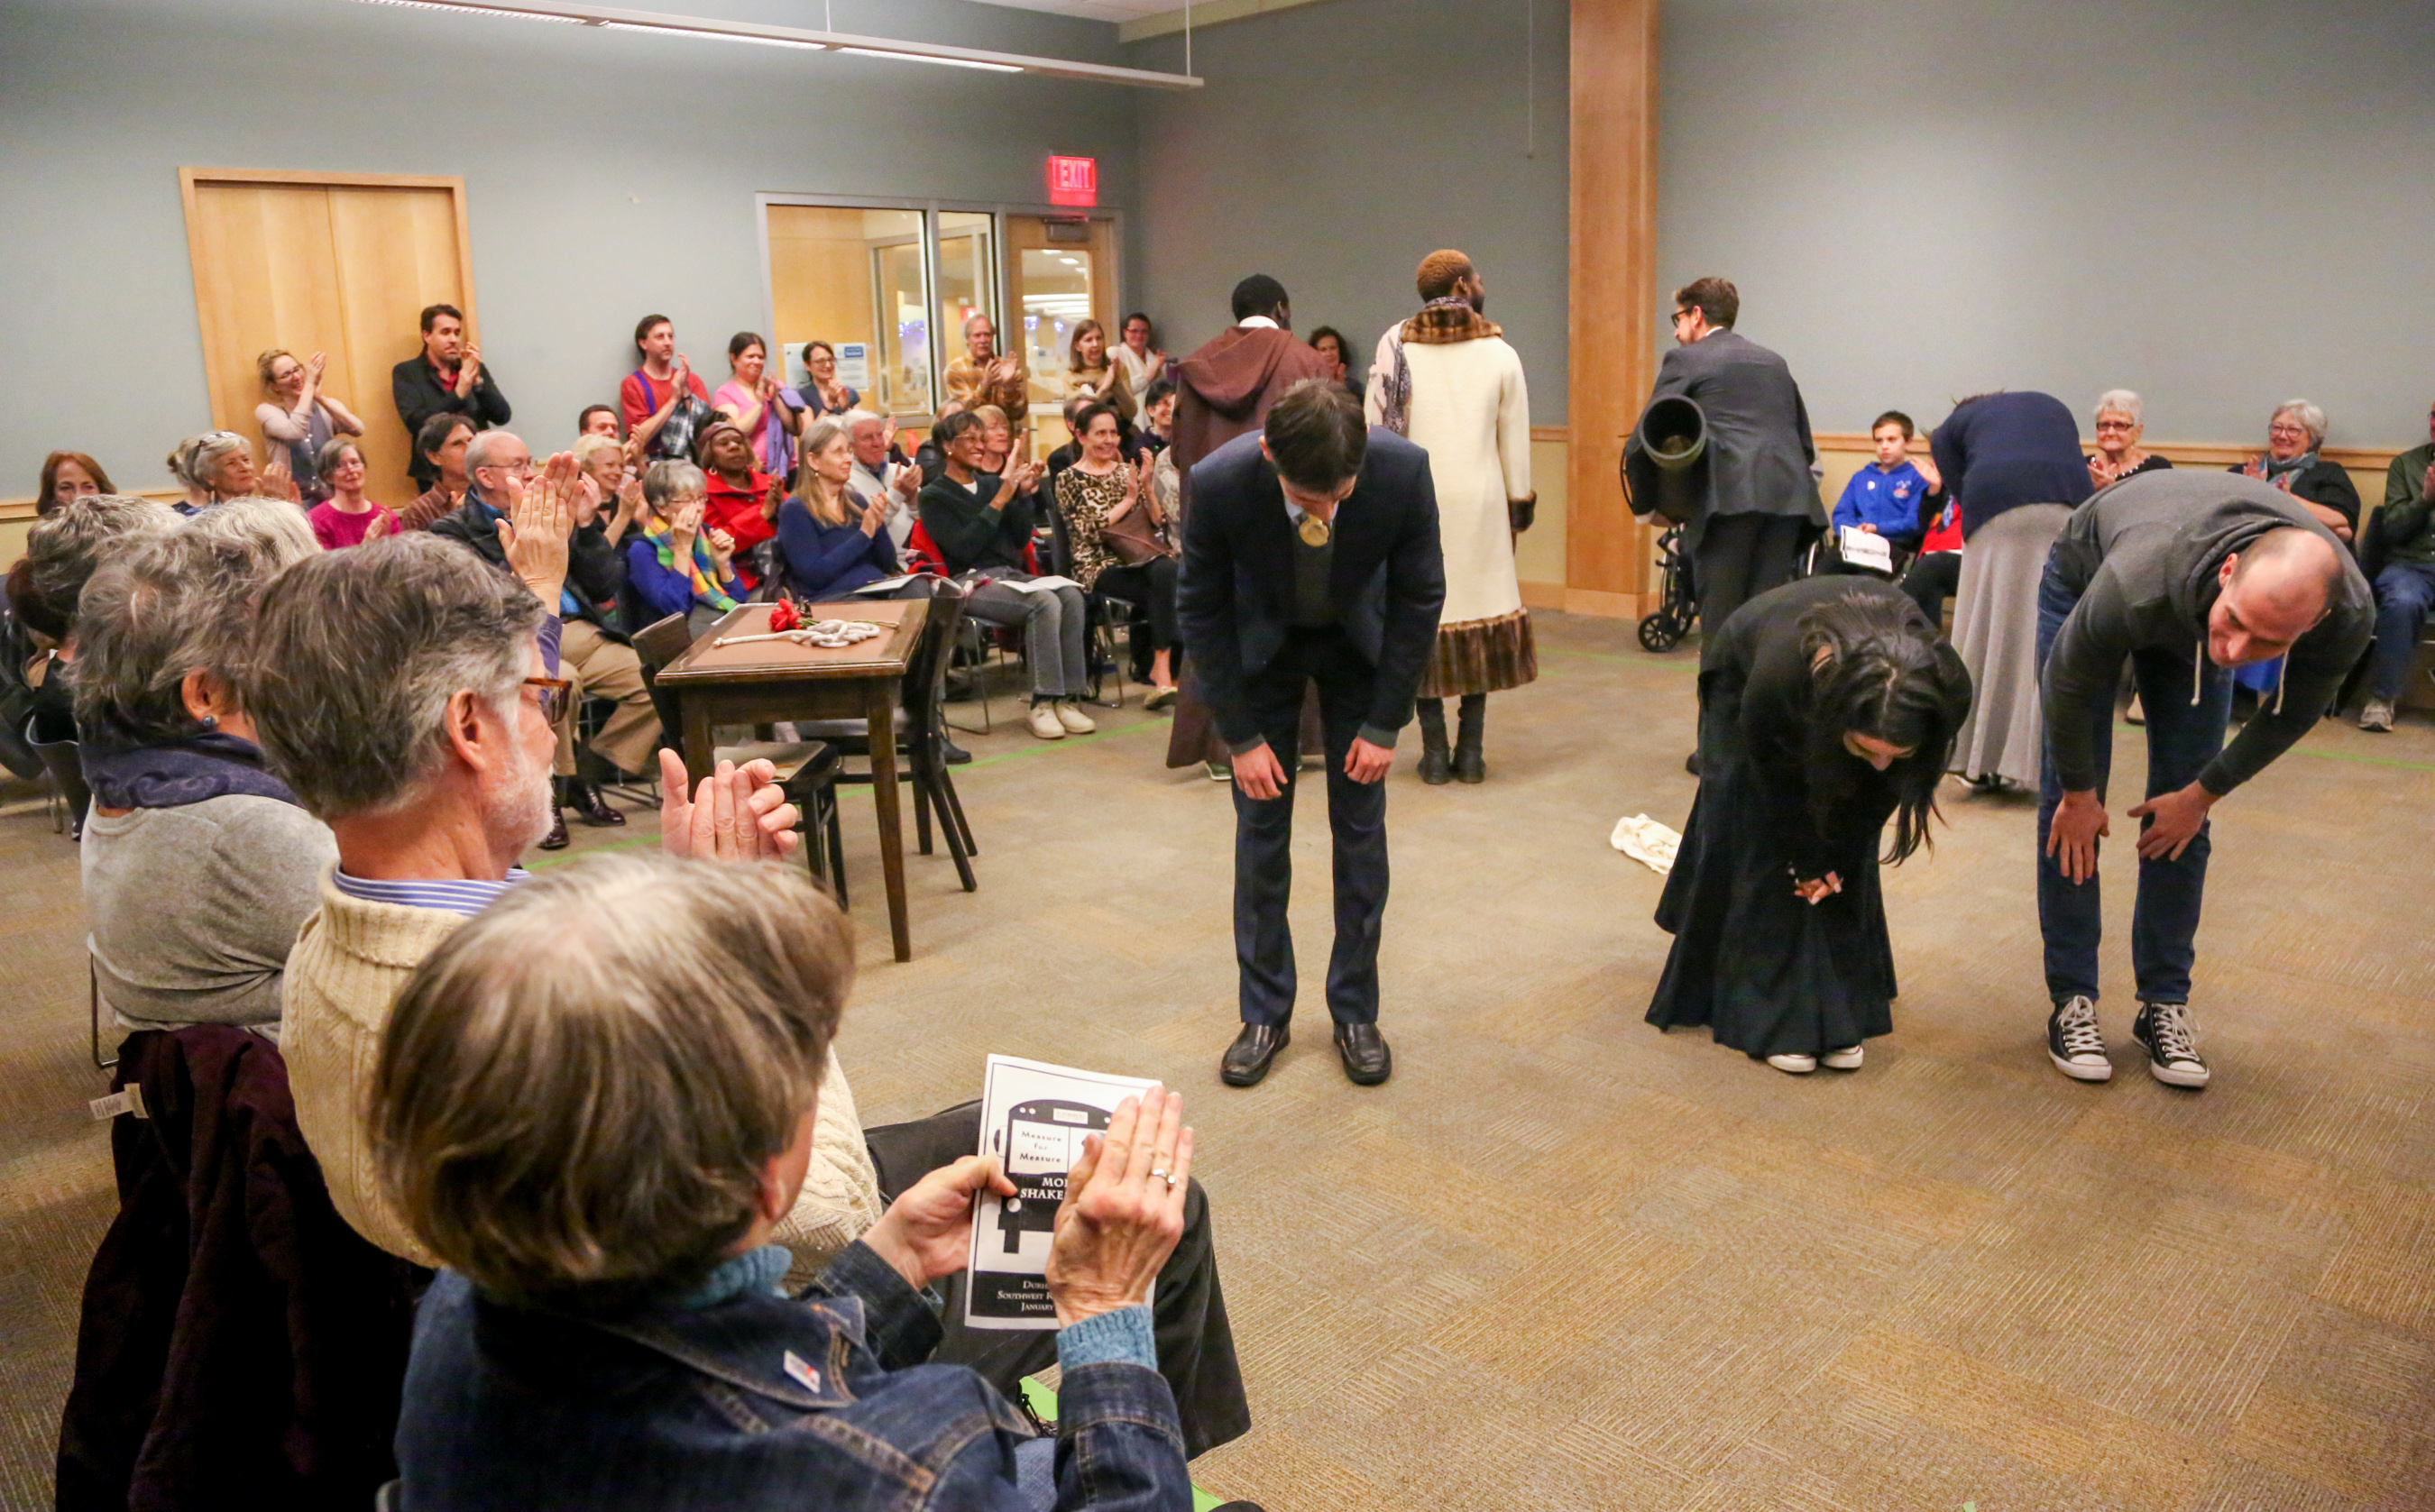 actors get an ovation after performing Shakespeare in a library setting